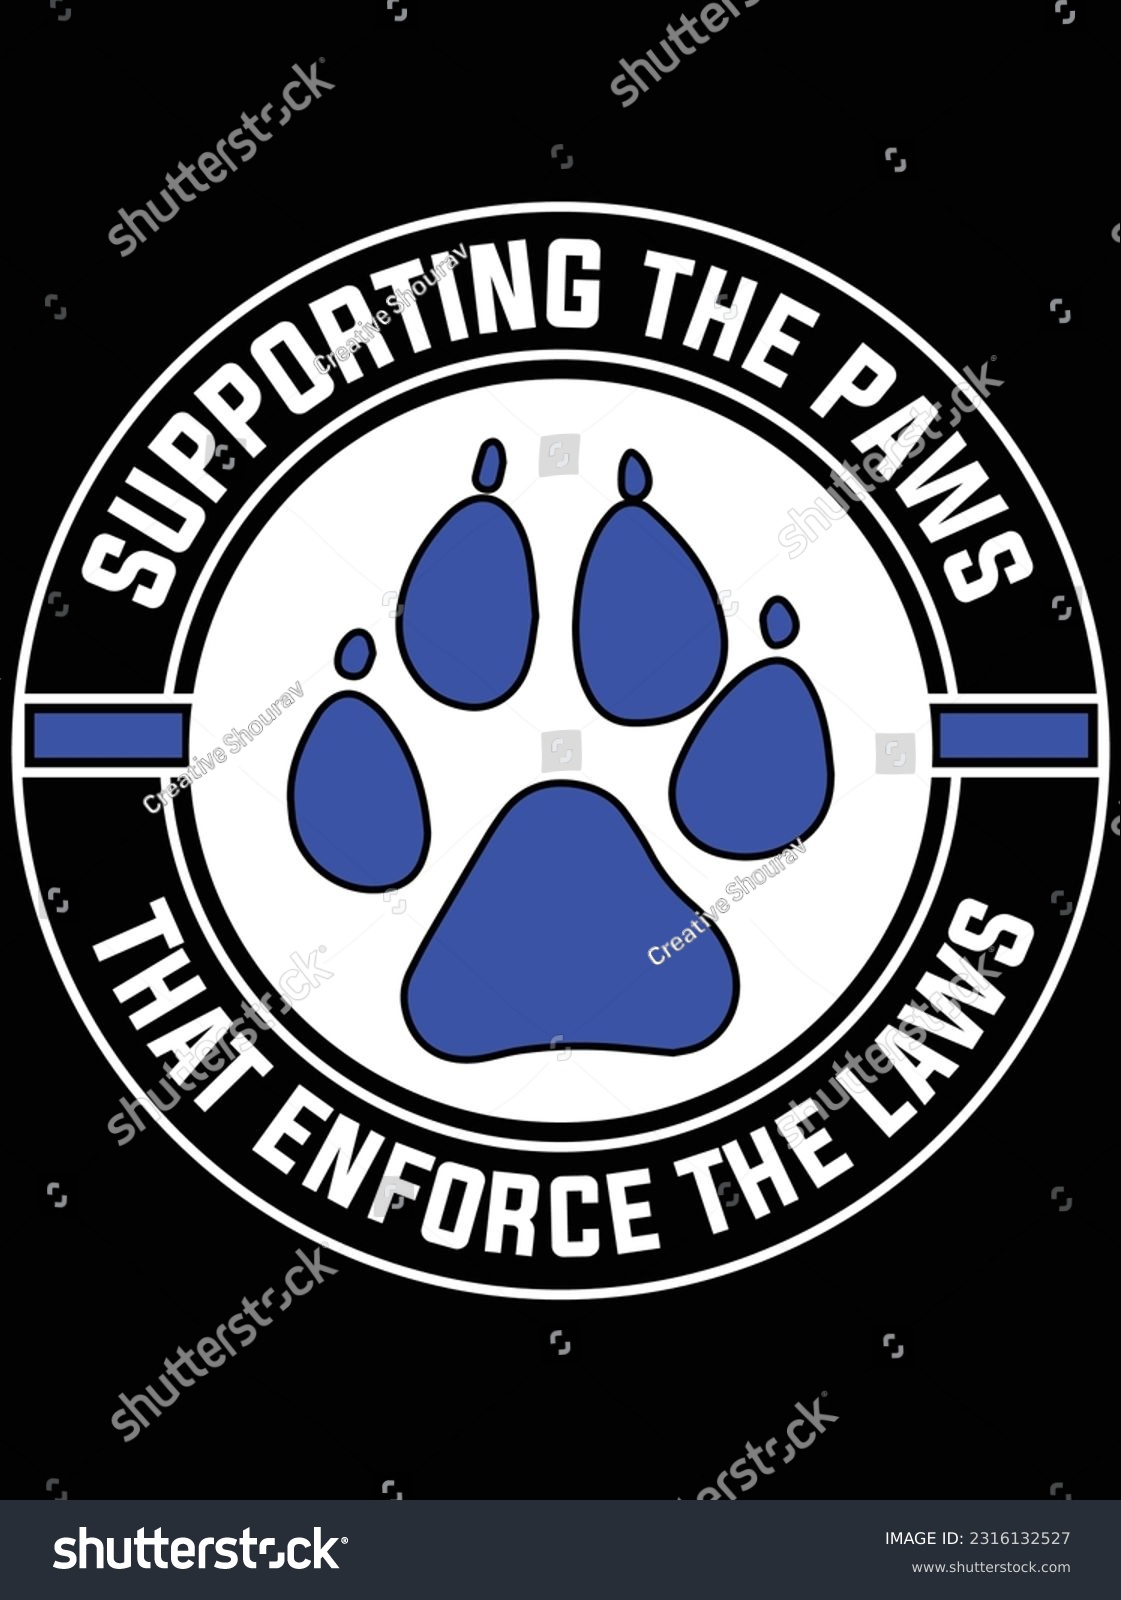 SVG of Supporting the paws that enforce the laws vector art design, eps file. design file for t-shirt. SVG, EPS cuttable design file svg